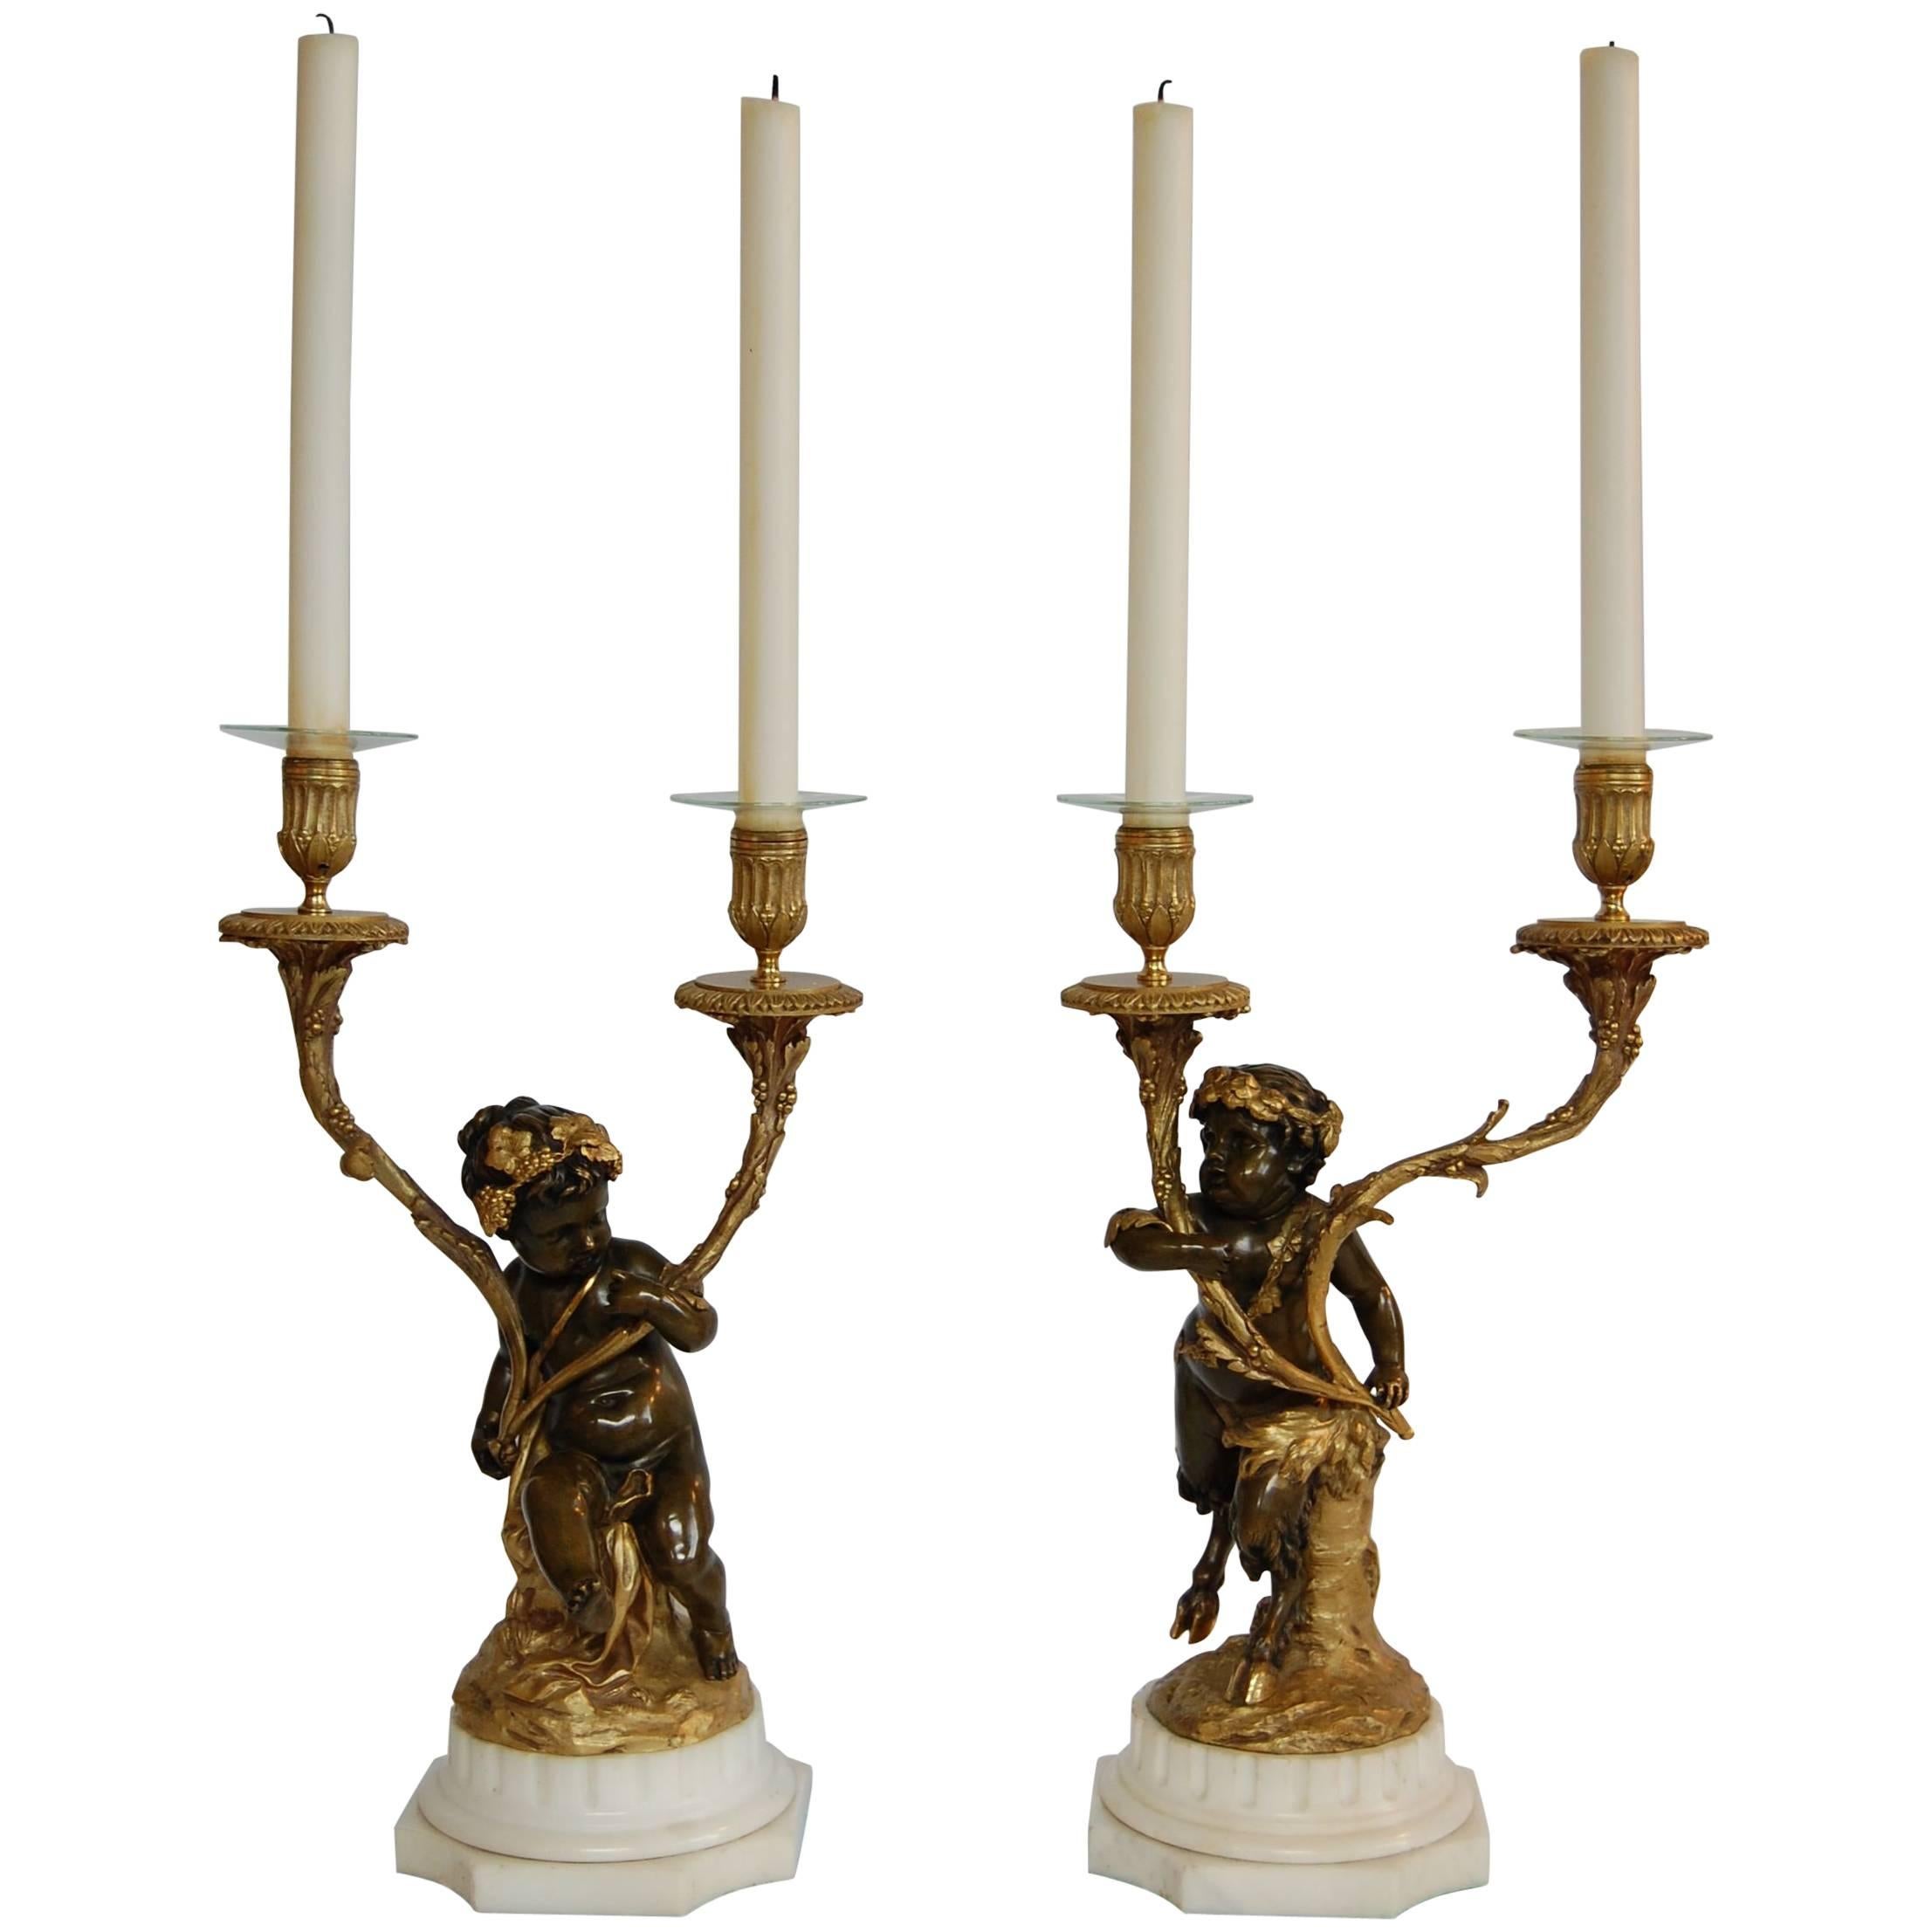 Pair of Gilt and Patinated Two-Light Candelabra, Signed "Clodion" For Sale